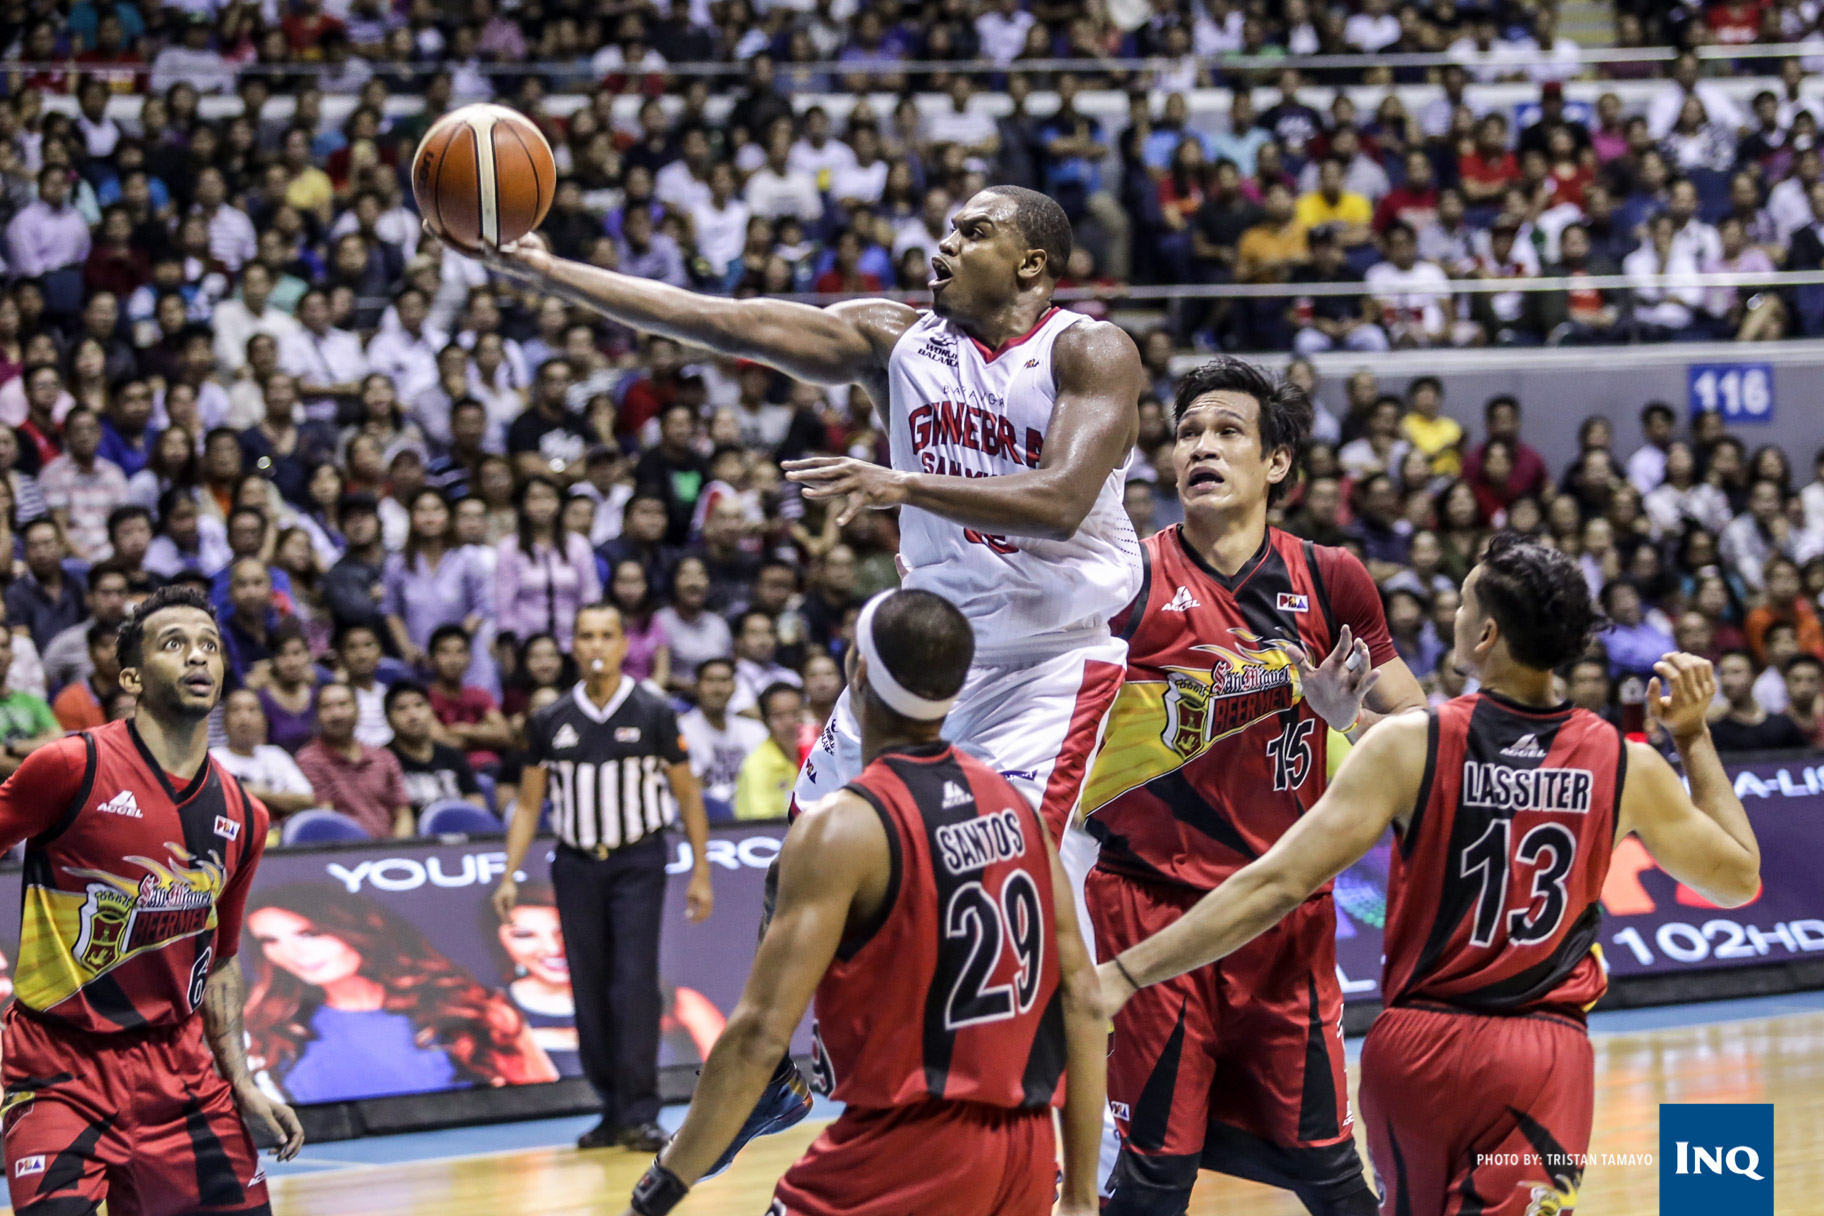 PBA Semifinals game between the Ginebra Gin Kings and San Miguel Beermen. Photo by Tristan Tamayo/INQUIRER.net